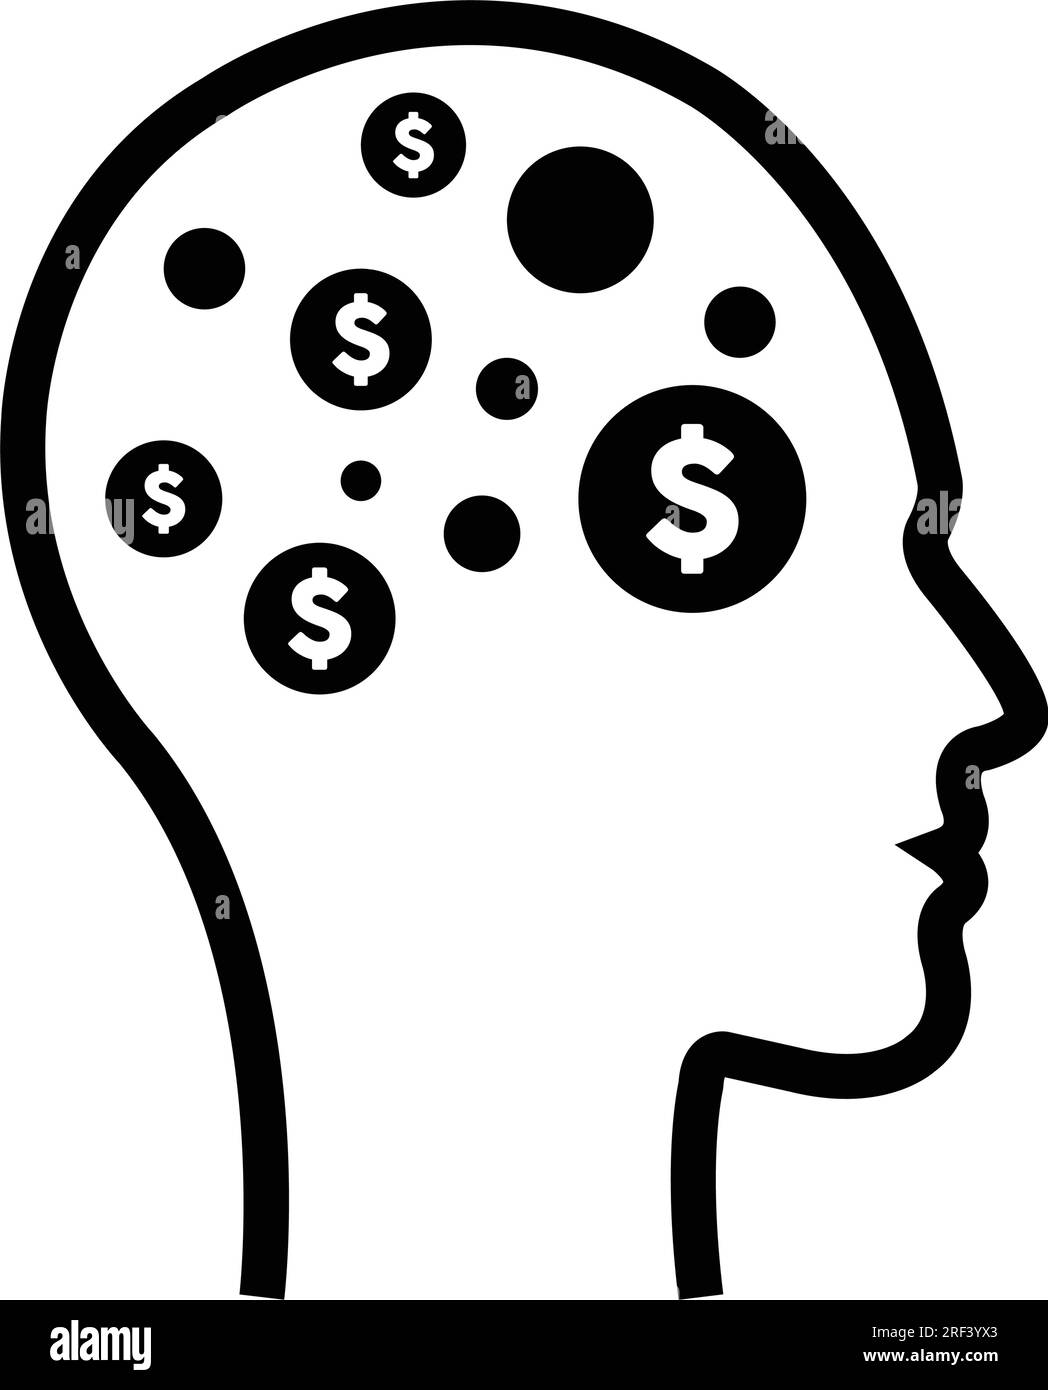 The digital dollar sign icon is on a futuristic human profile face with an implanted brain chip for AI artifical intelligence finance and money mind i Stock Vector